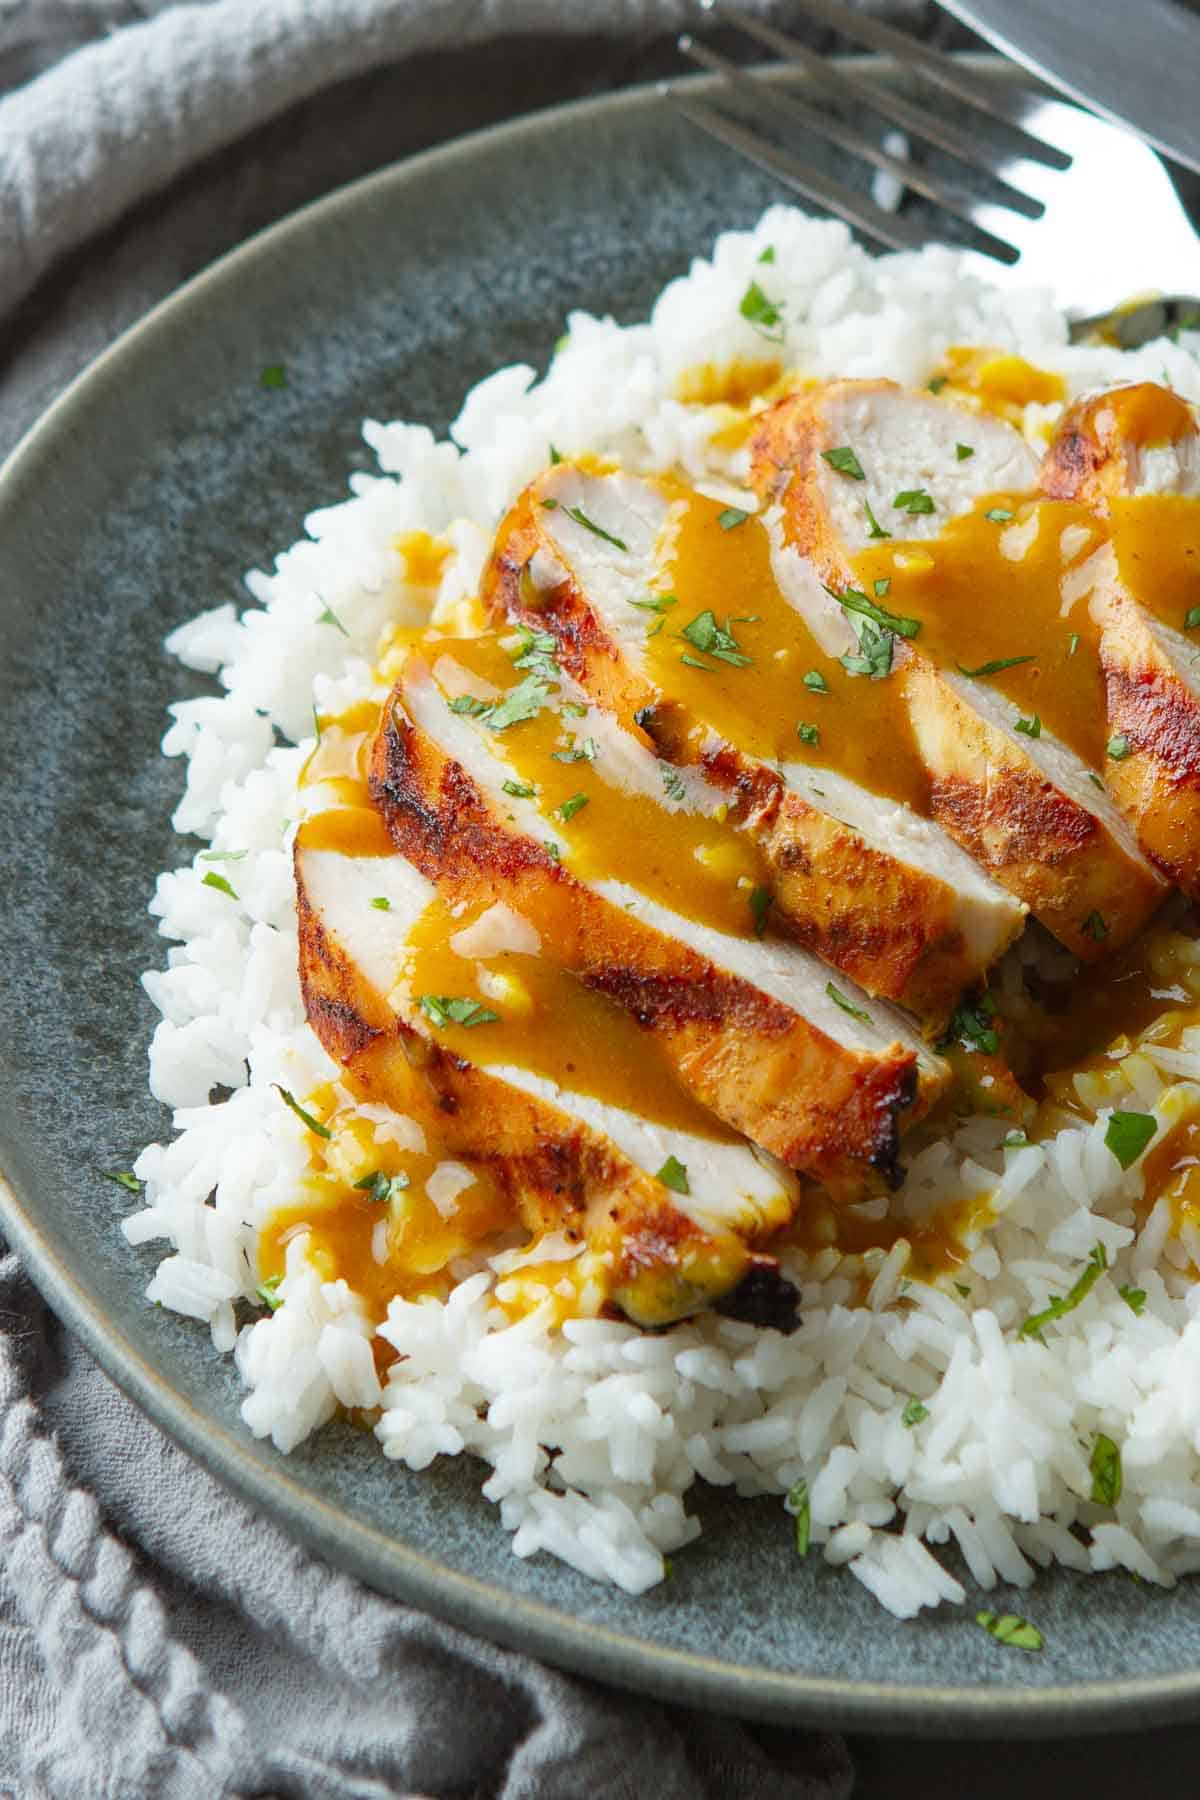 Sliced chicken breast on a bed of rice, drizzled with a curry sauce.